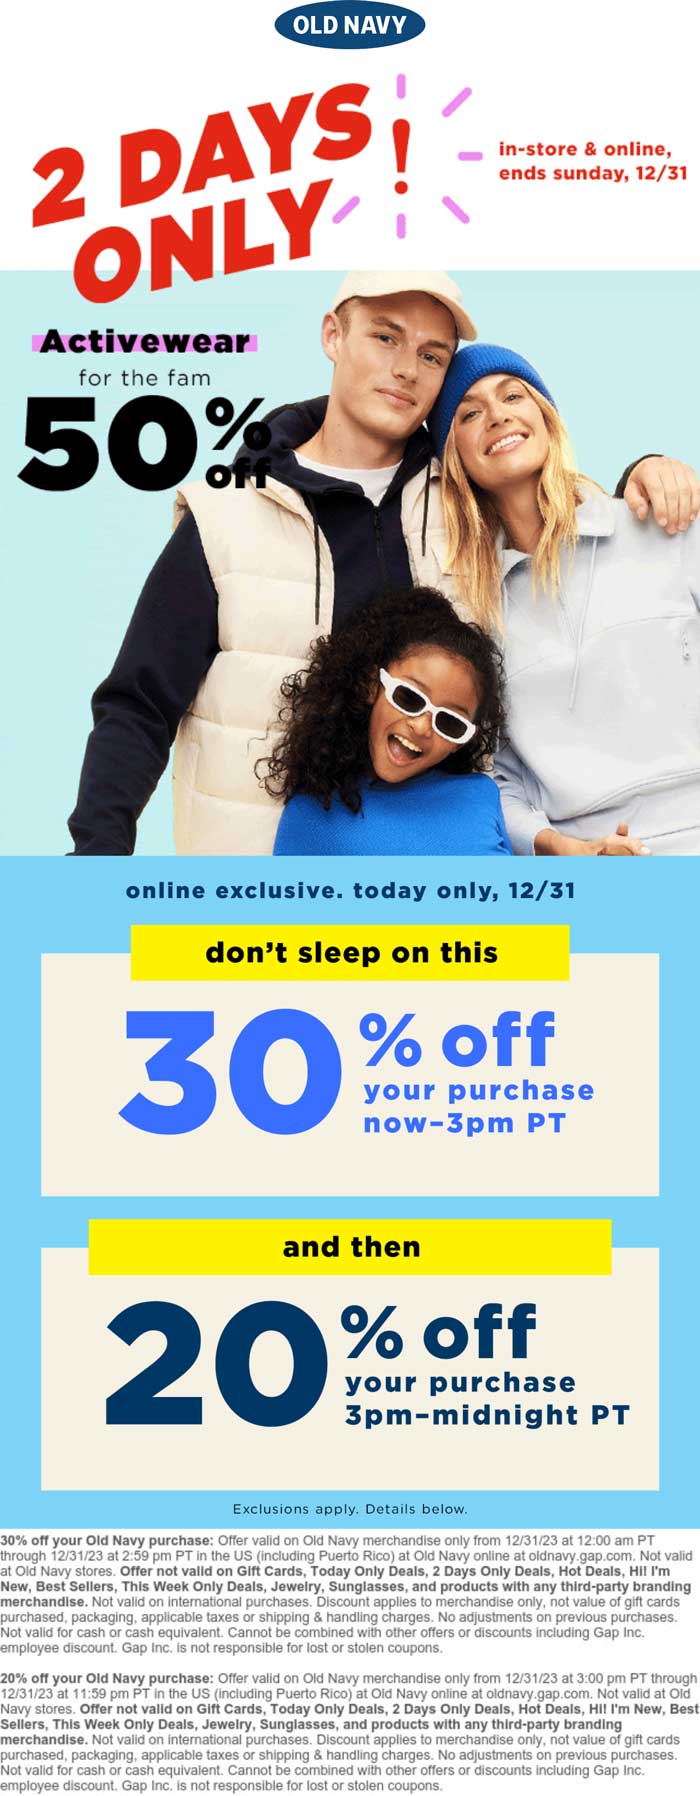 50% off activewear & more today at Old Navy #oldnavy